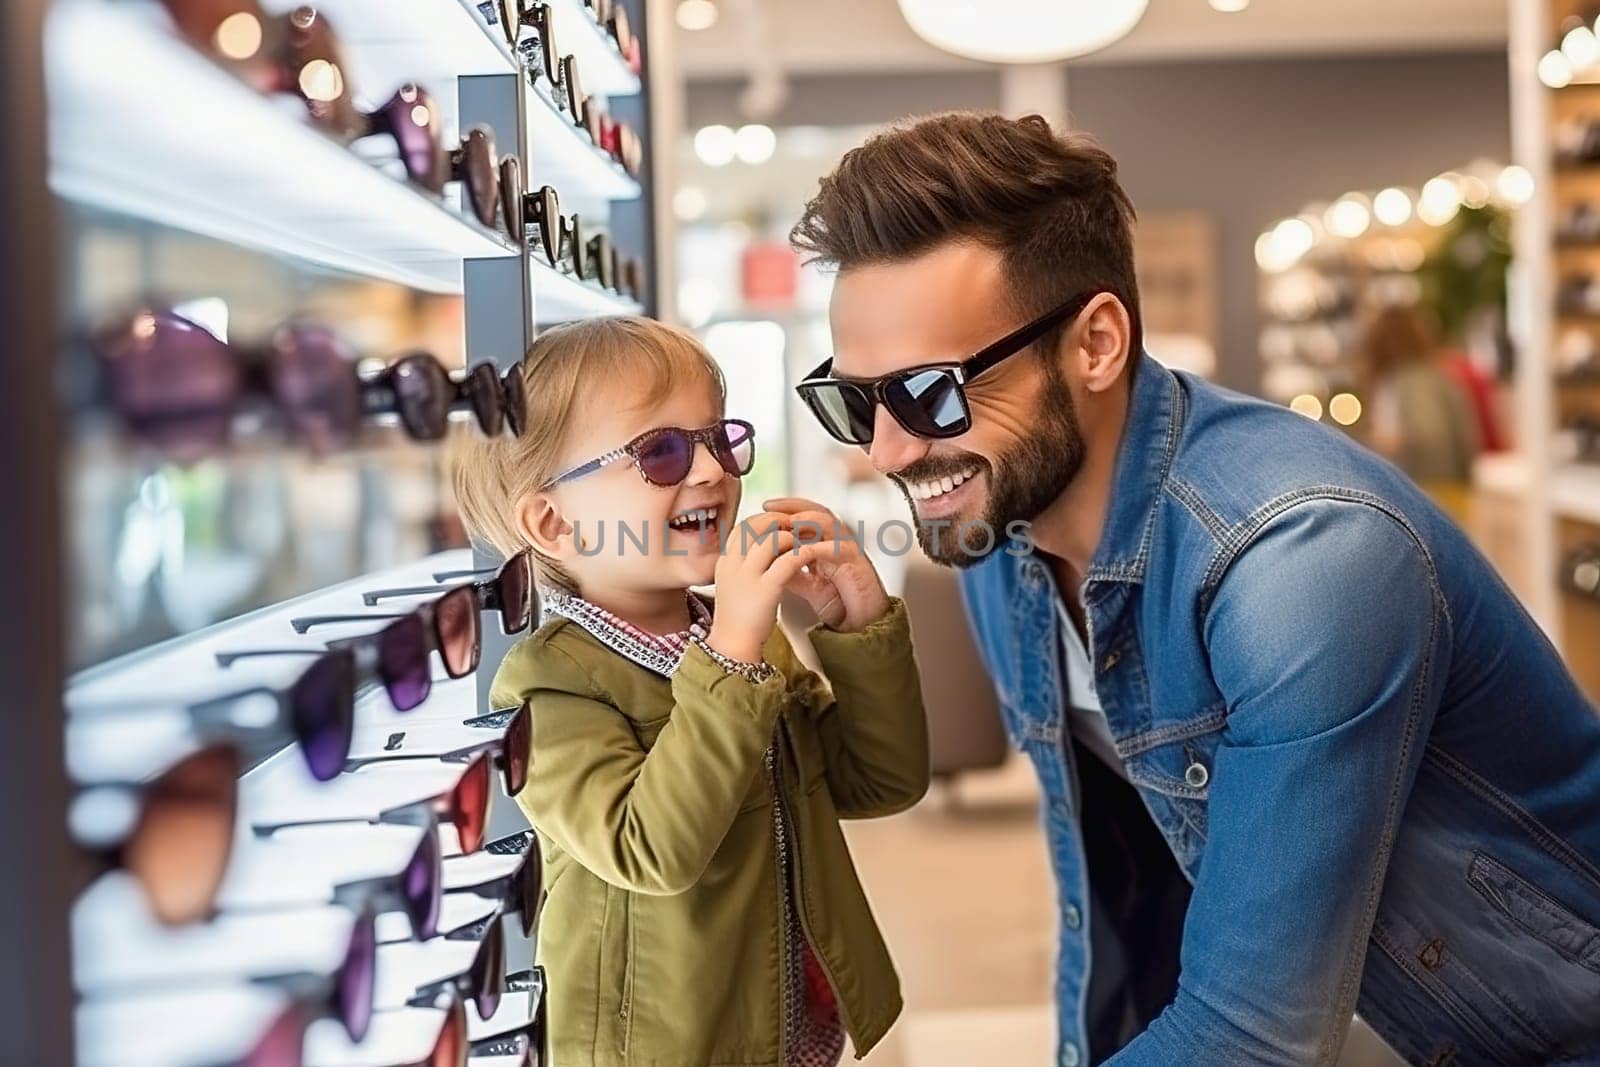 A happy father picks out his son's sunglasses